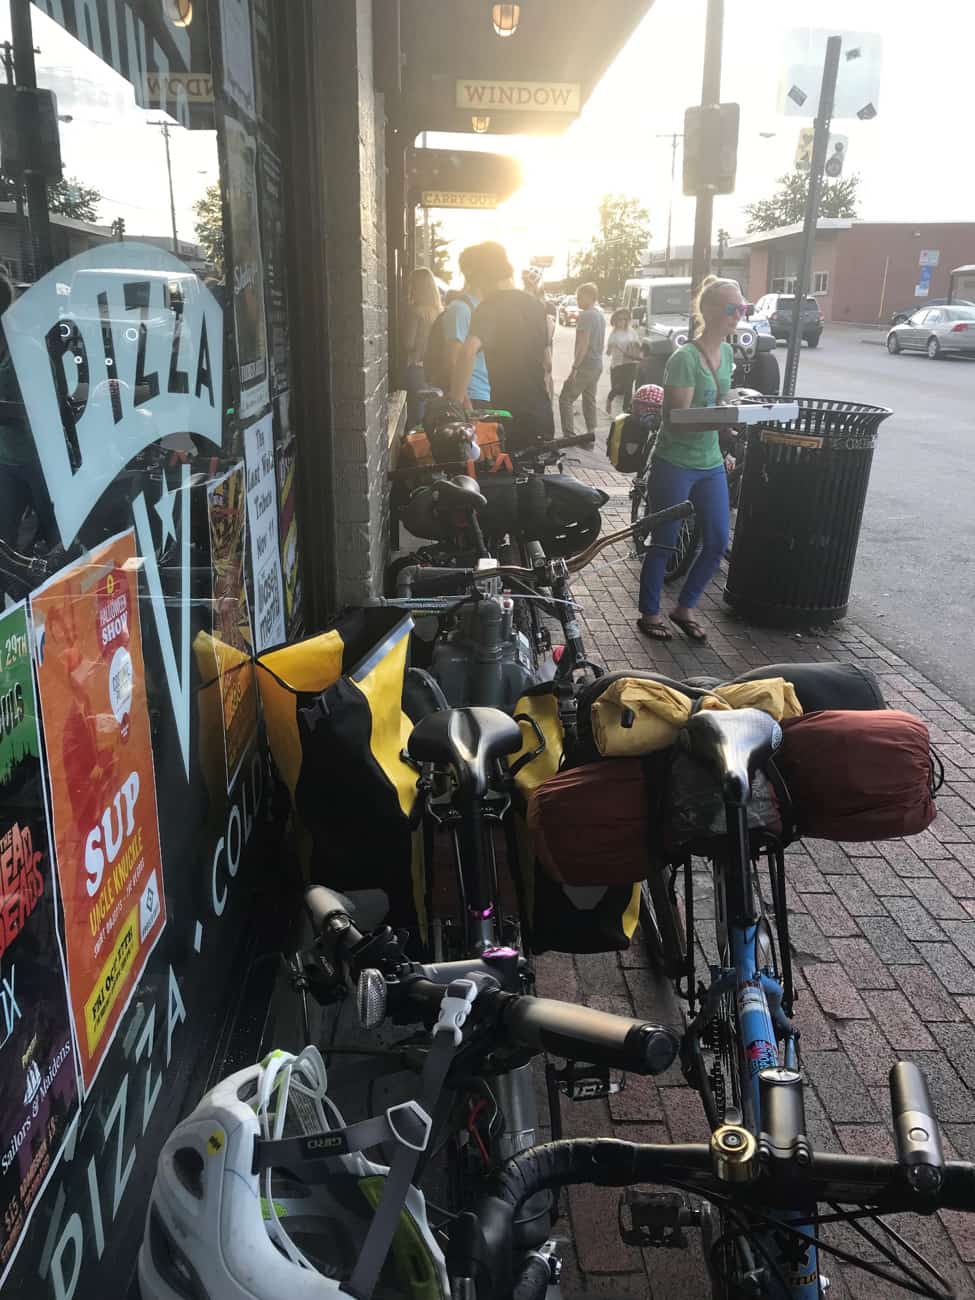 Bikes lined up and parked on a red brick sidewalk, next to the window of a pizza shop